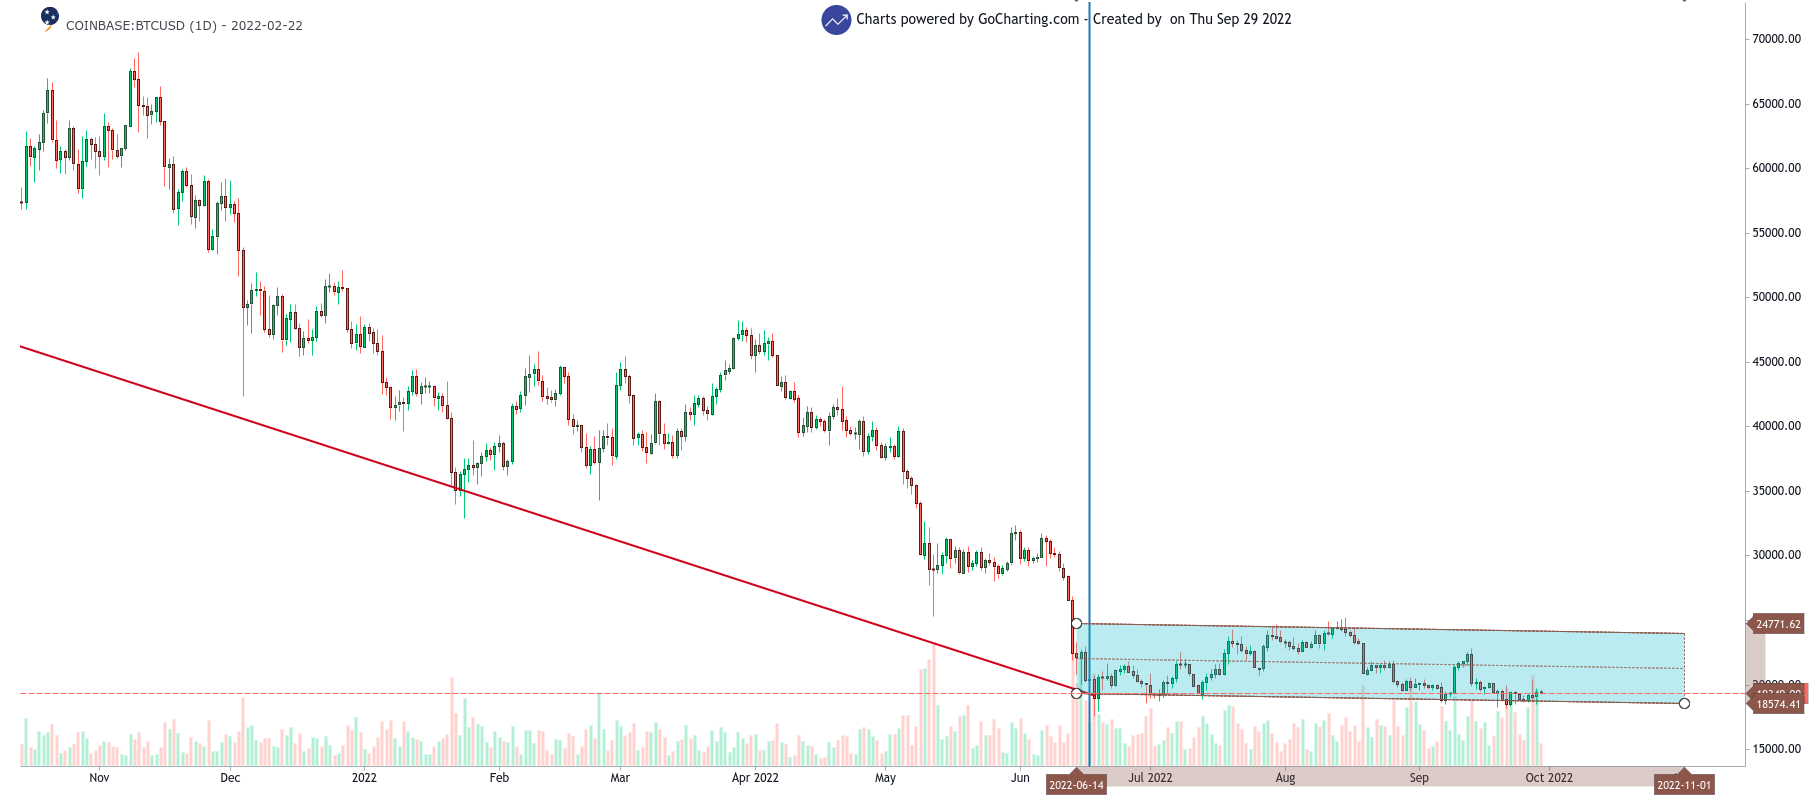 BTC/USD 1-day chart showing Bitcoin's consolidation